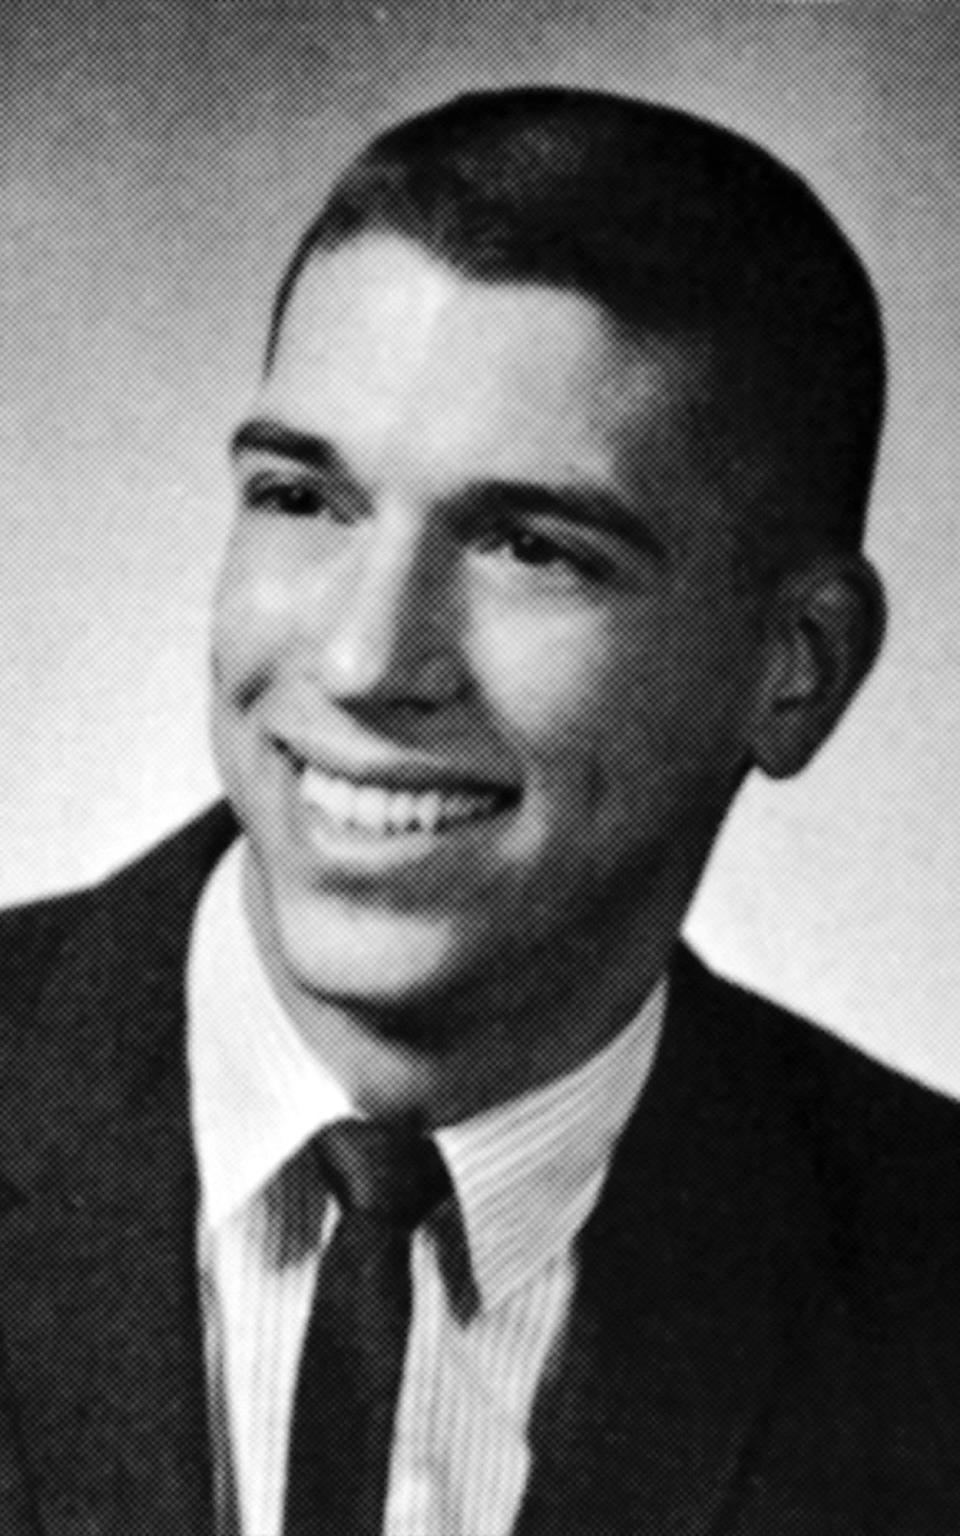 Hanssen in 1966: photo from his college year book - AP